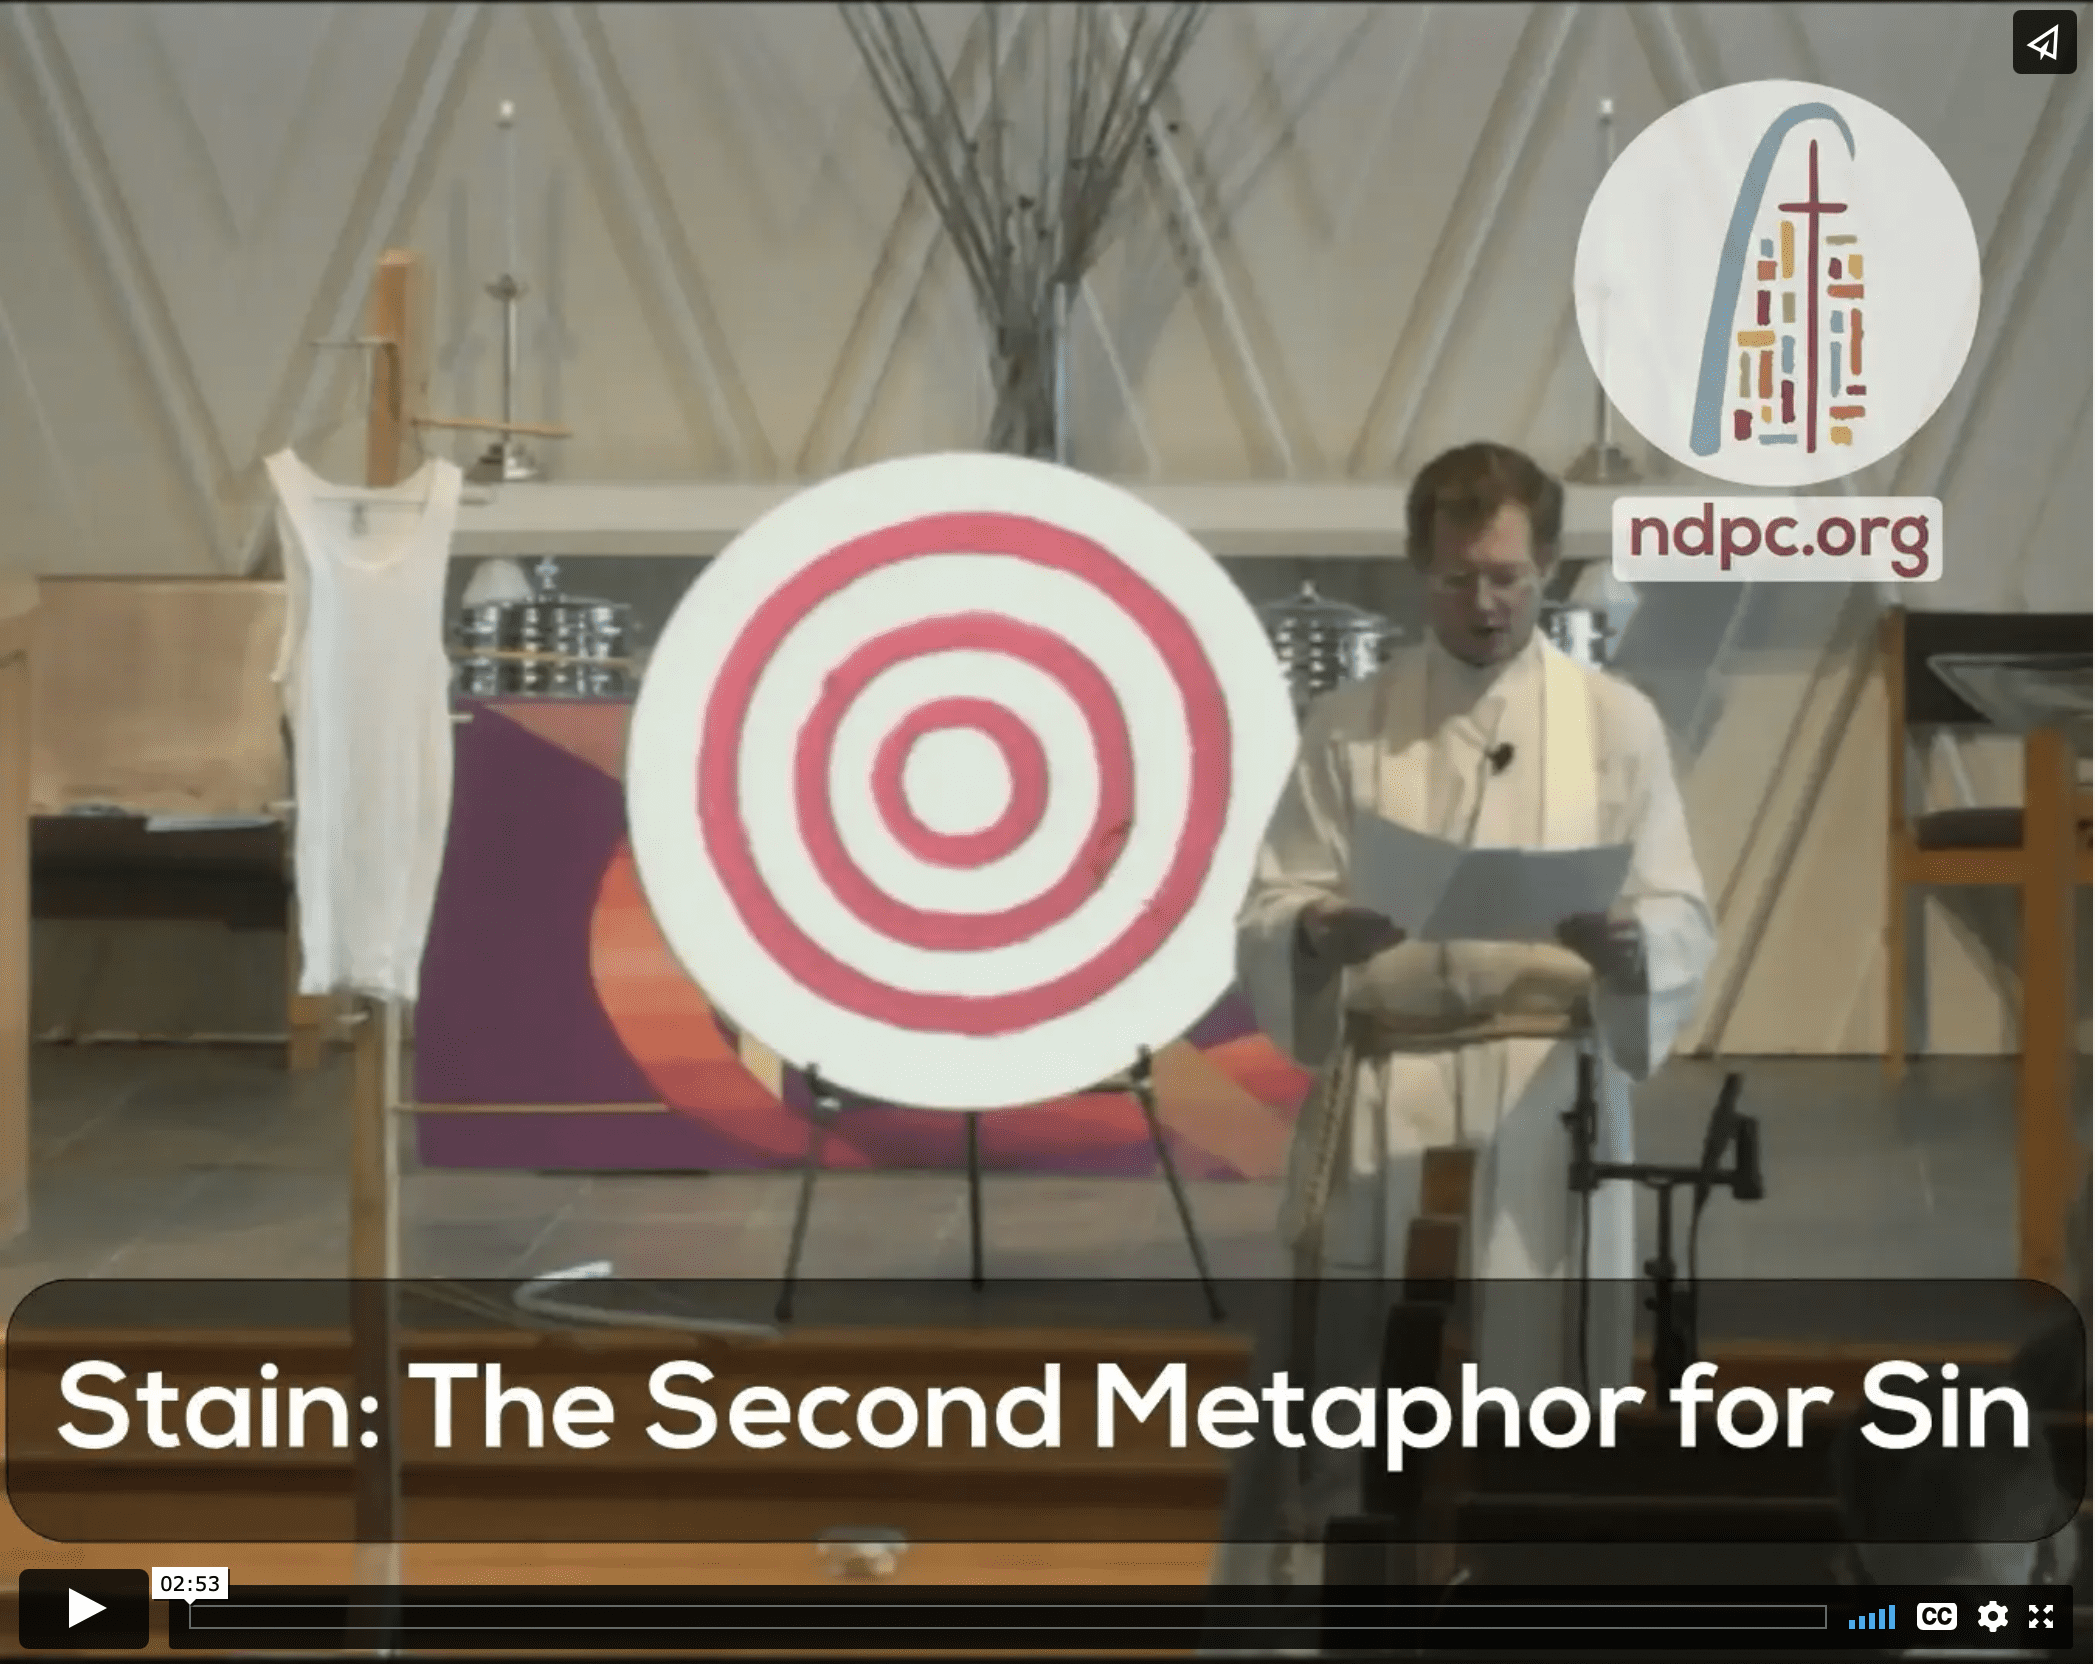 Video link to 2nd classical metaphor for sin: Stain